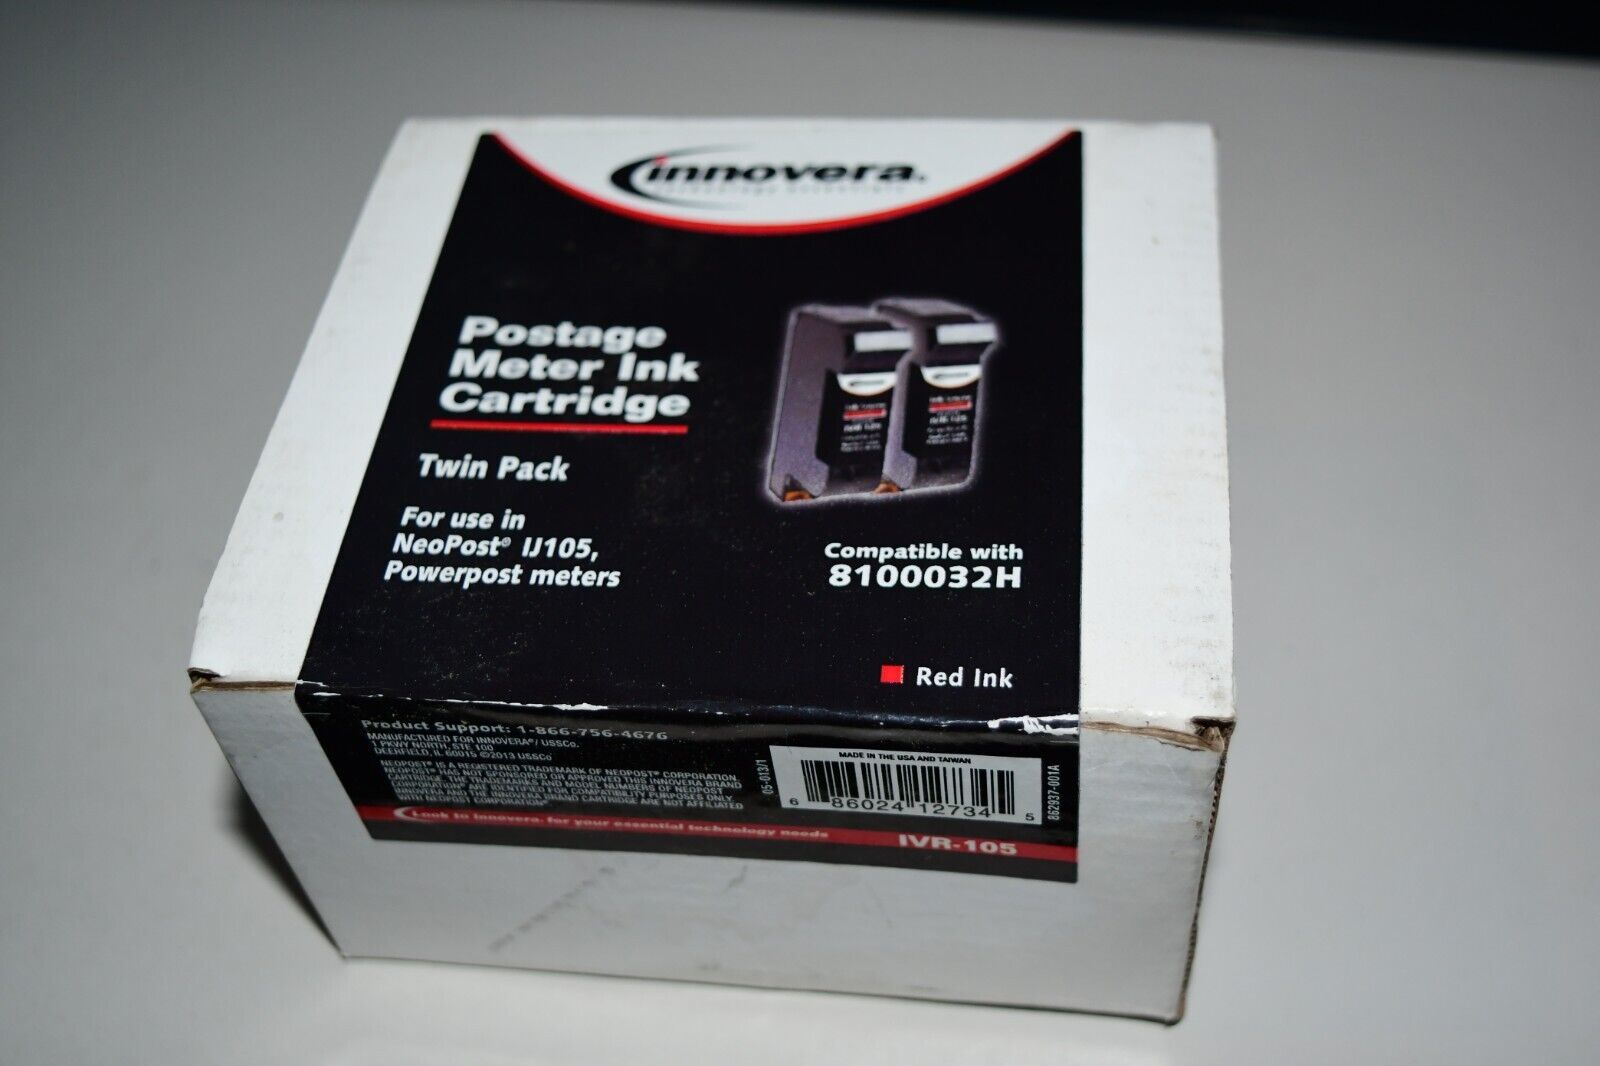 Primary image for Innovera IVR-105 Red Ink Cartridge NeoPost IJ105 8100032 POWER POST METER W5B